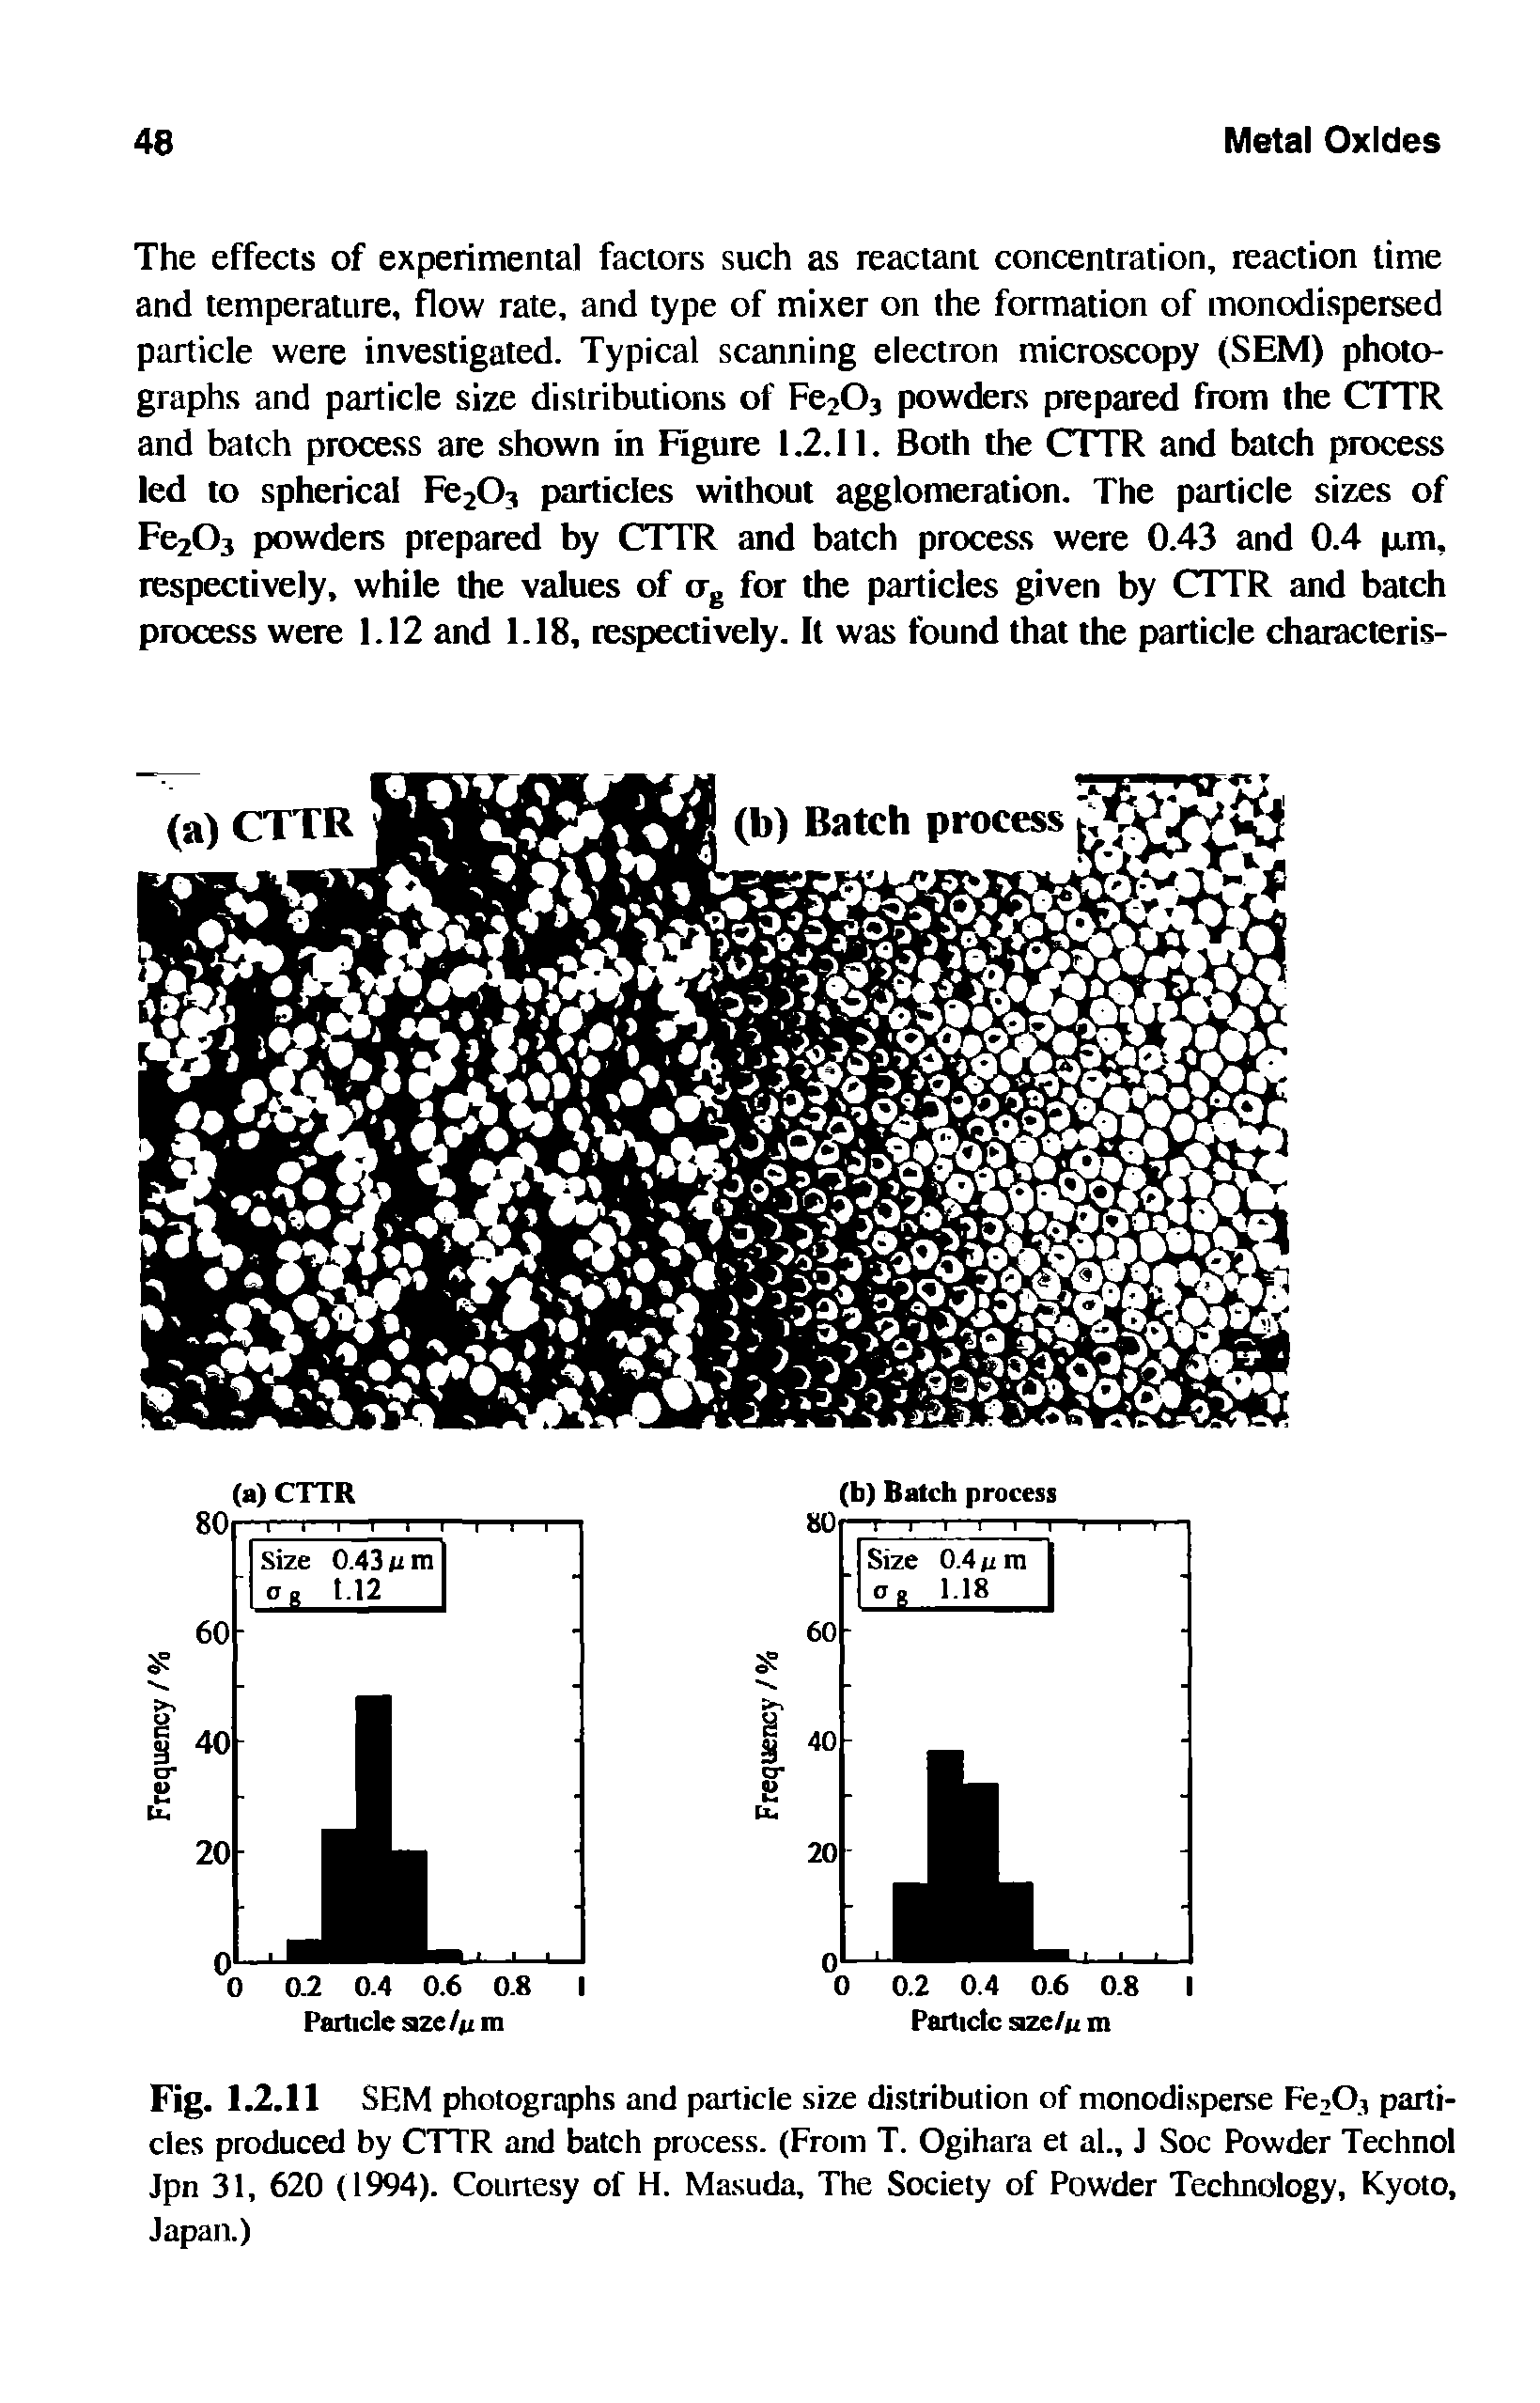 Fig. 1.2.11 SEM photographs and particle size distribution of monodisperse Fe20, particles produced by CTTR and batch process. (From T. Ogihara et al., J Soc Powder Technol Jpn 31, 620 (1994). Courtesy of H. Masuda, The Society of Powder Technology, Kyoto, Japan.)...